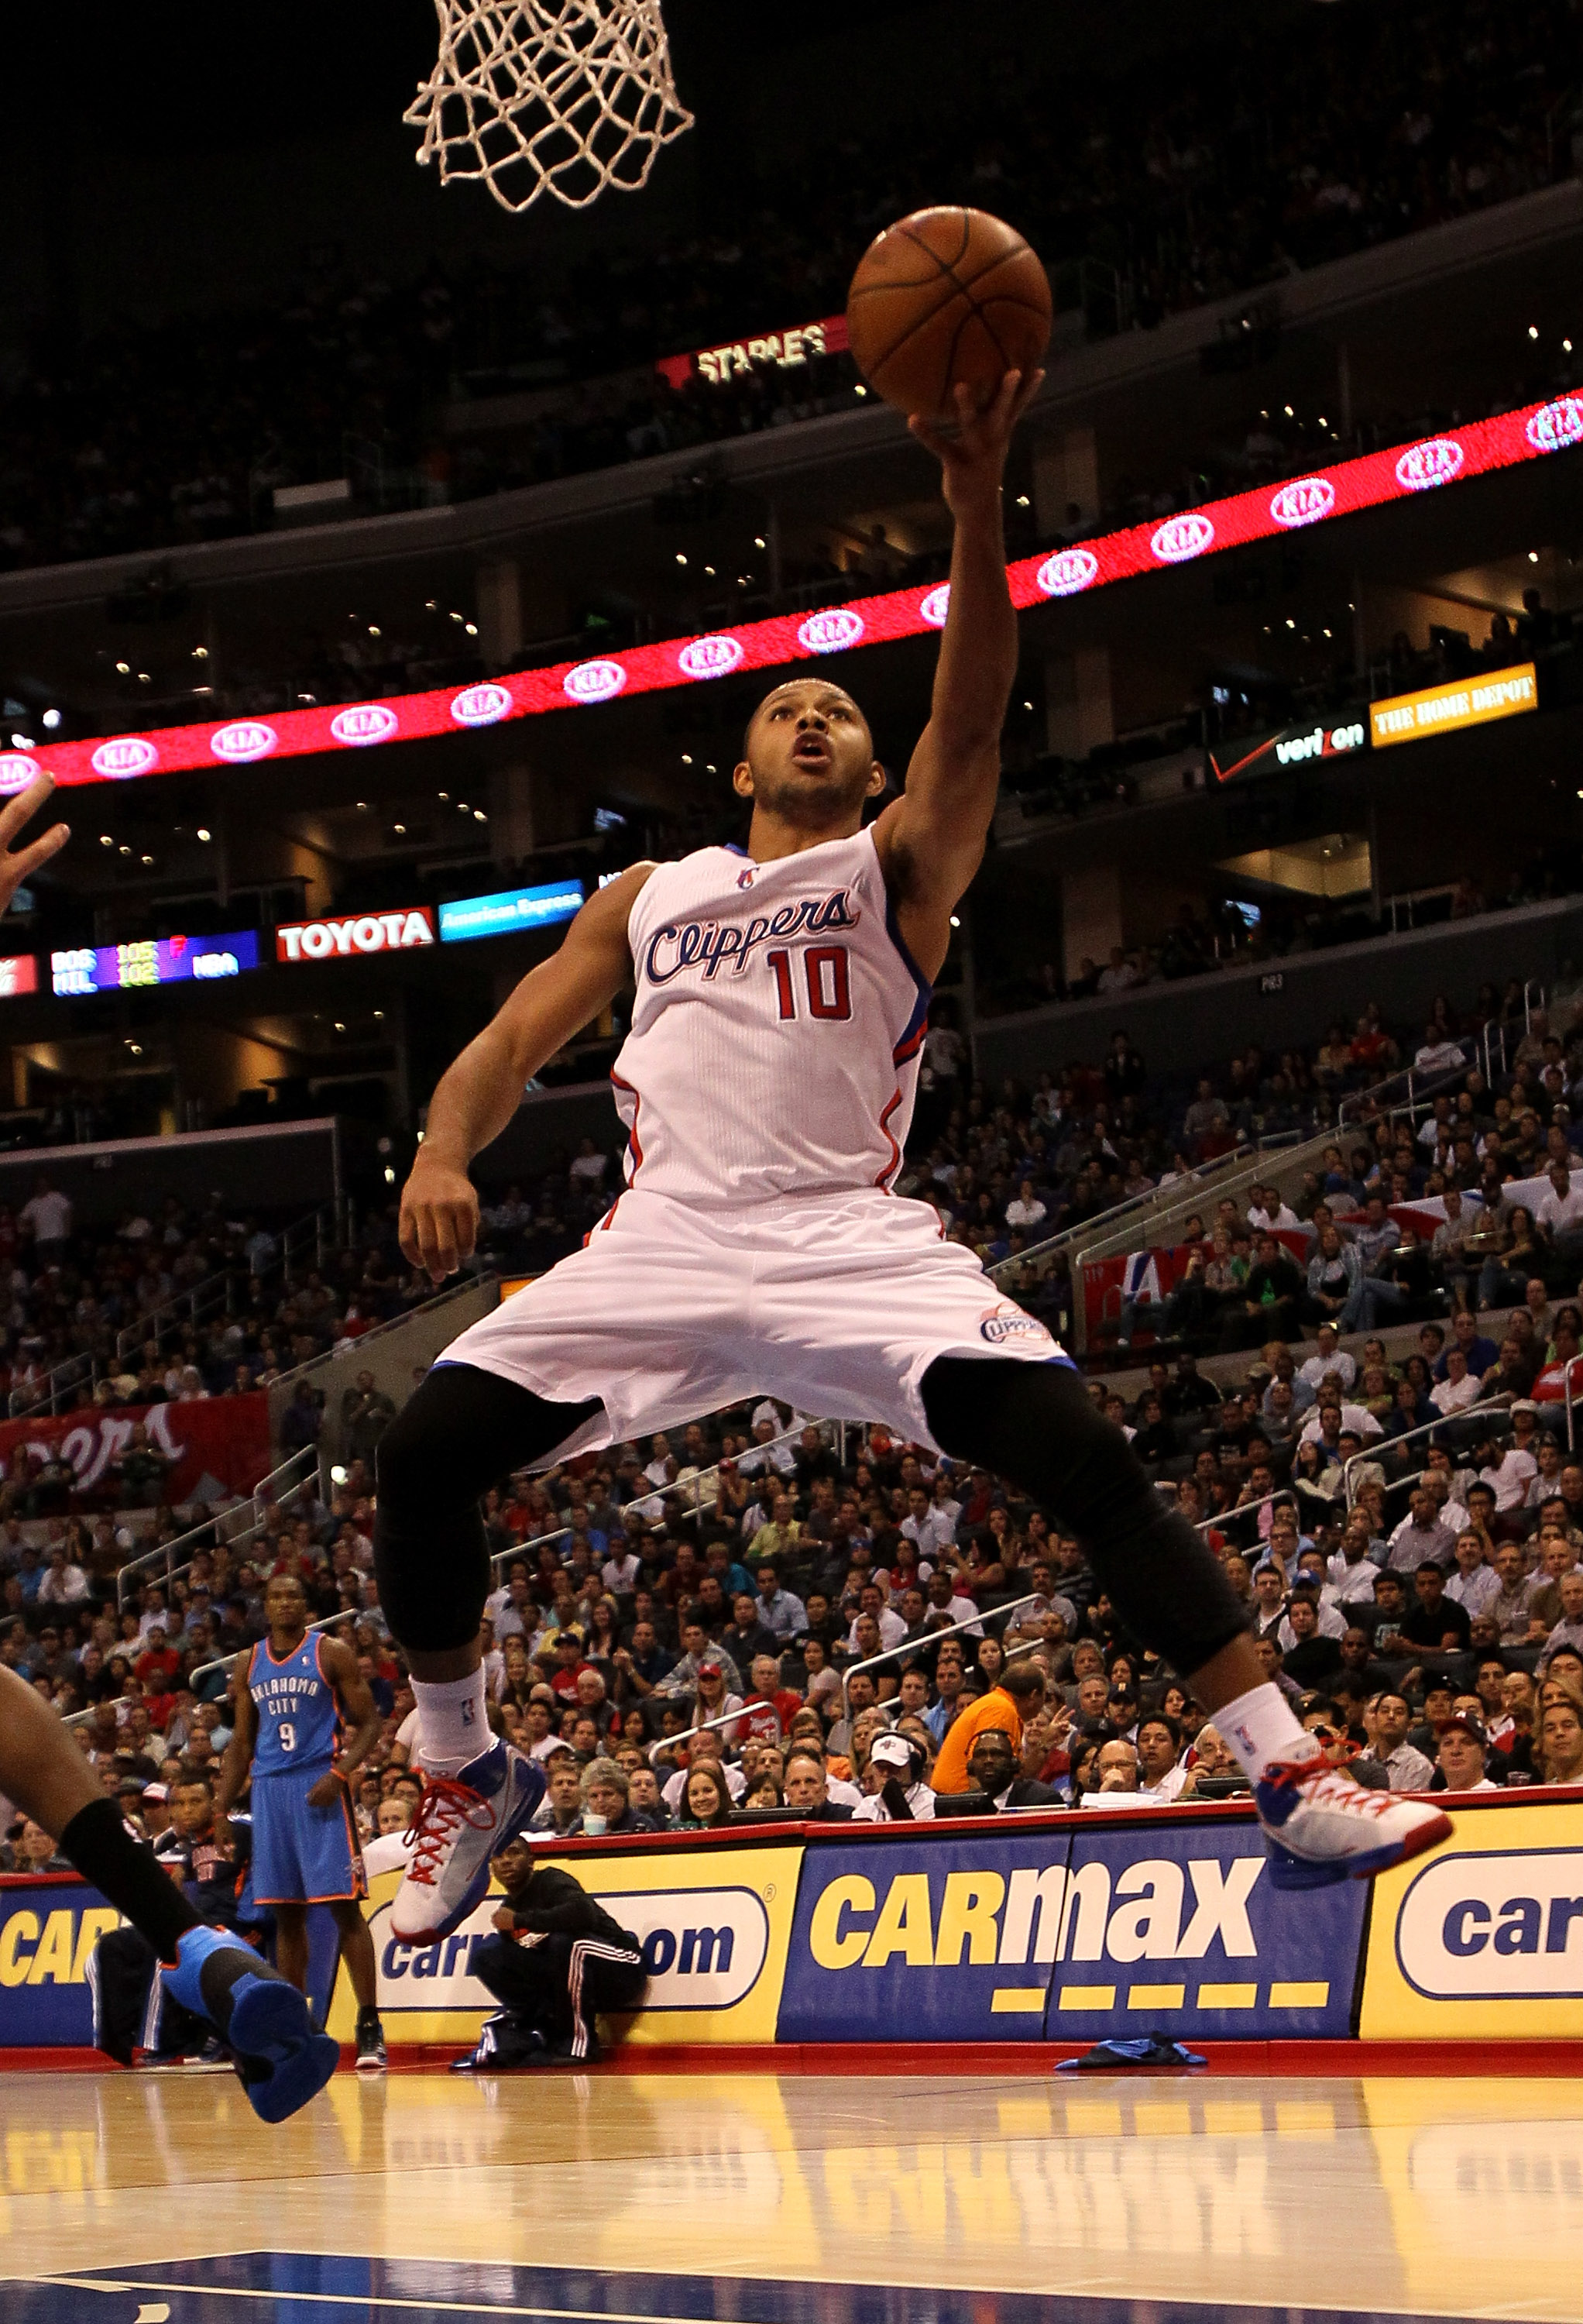 LOS ANGELES - NOVEMBER 3:  Eric Gordon #10 of the Los Angeles Clippers goes up for a shot against the Oklahoma City Thunder at Staples Center on November 3, 2010 in Los Angeles, California. The Clippers won 107-92.  NOTE TO USER: User expressly acknowledg